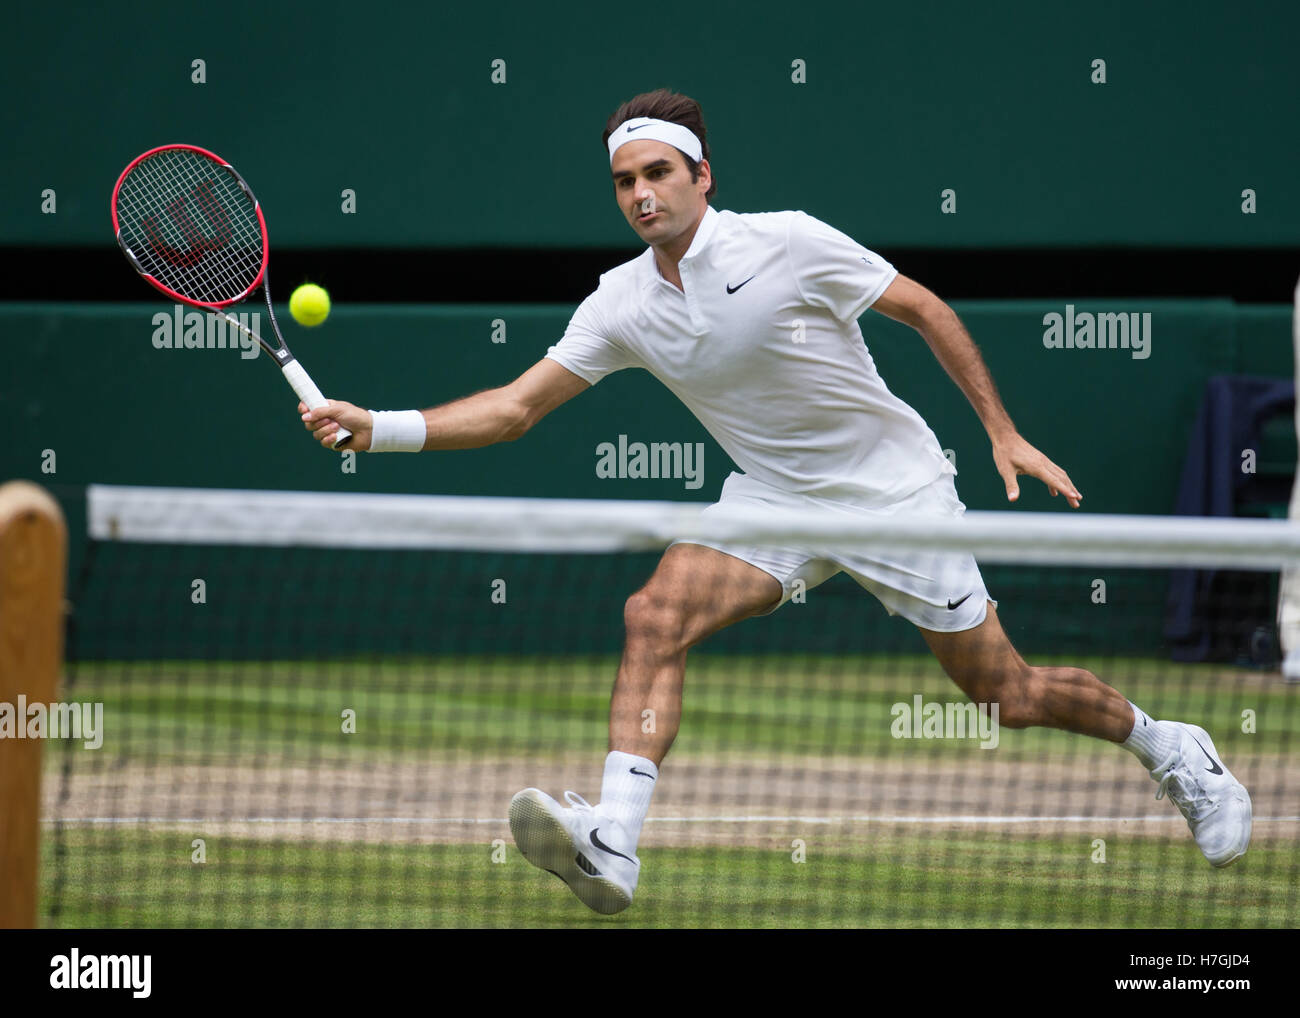 Roger Federer (SUI) in Aktion bei Wimbledon 2016 Stockfoto